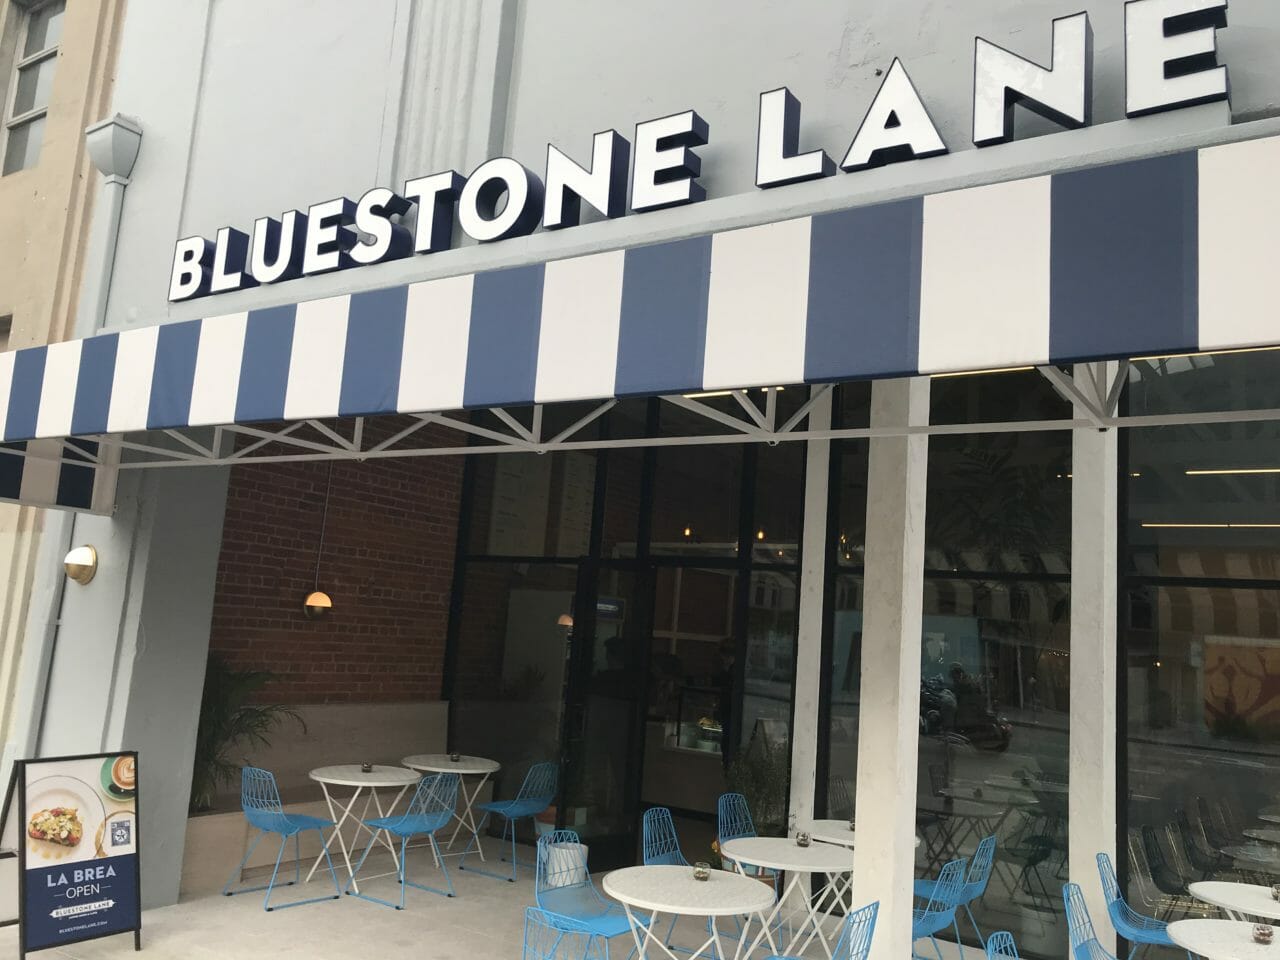 exterior of Bluestone Lane La Brea with blue and white awning.